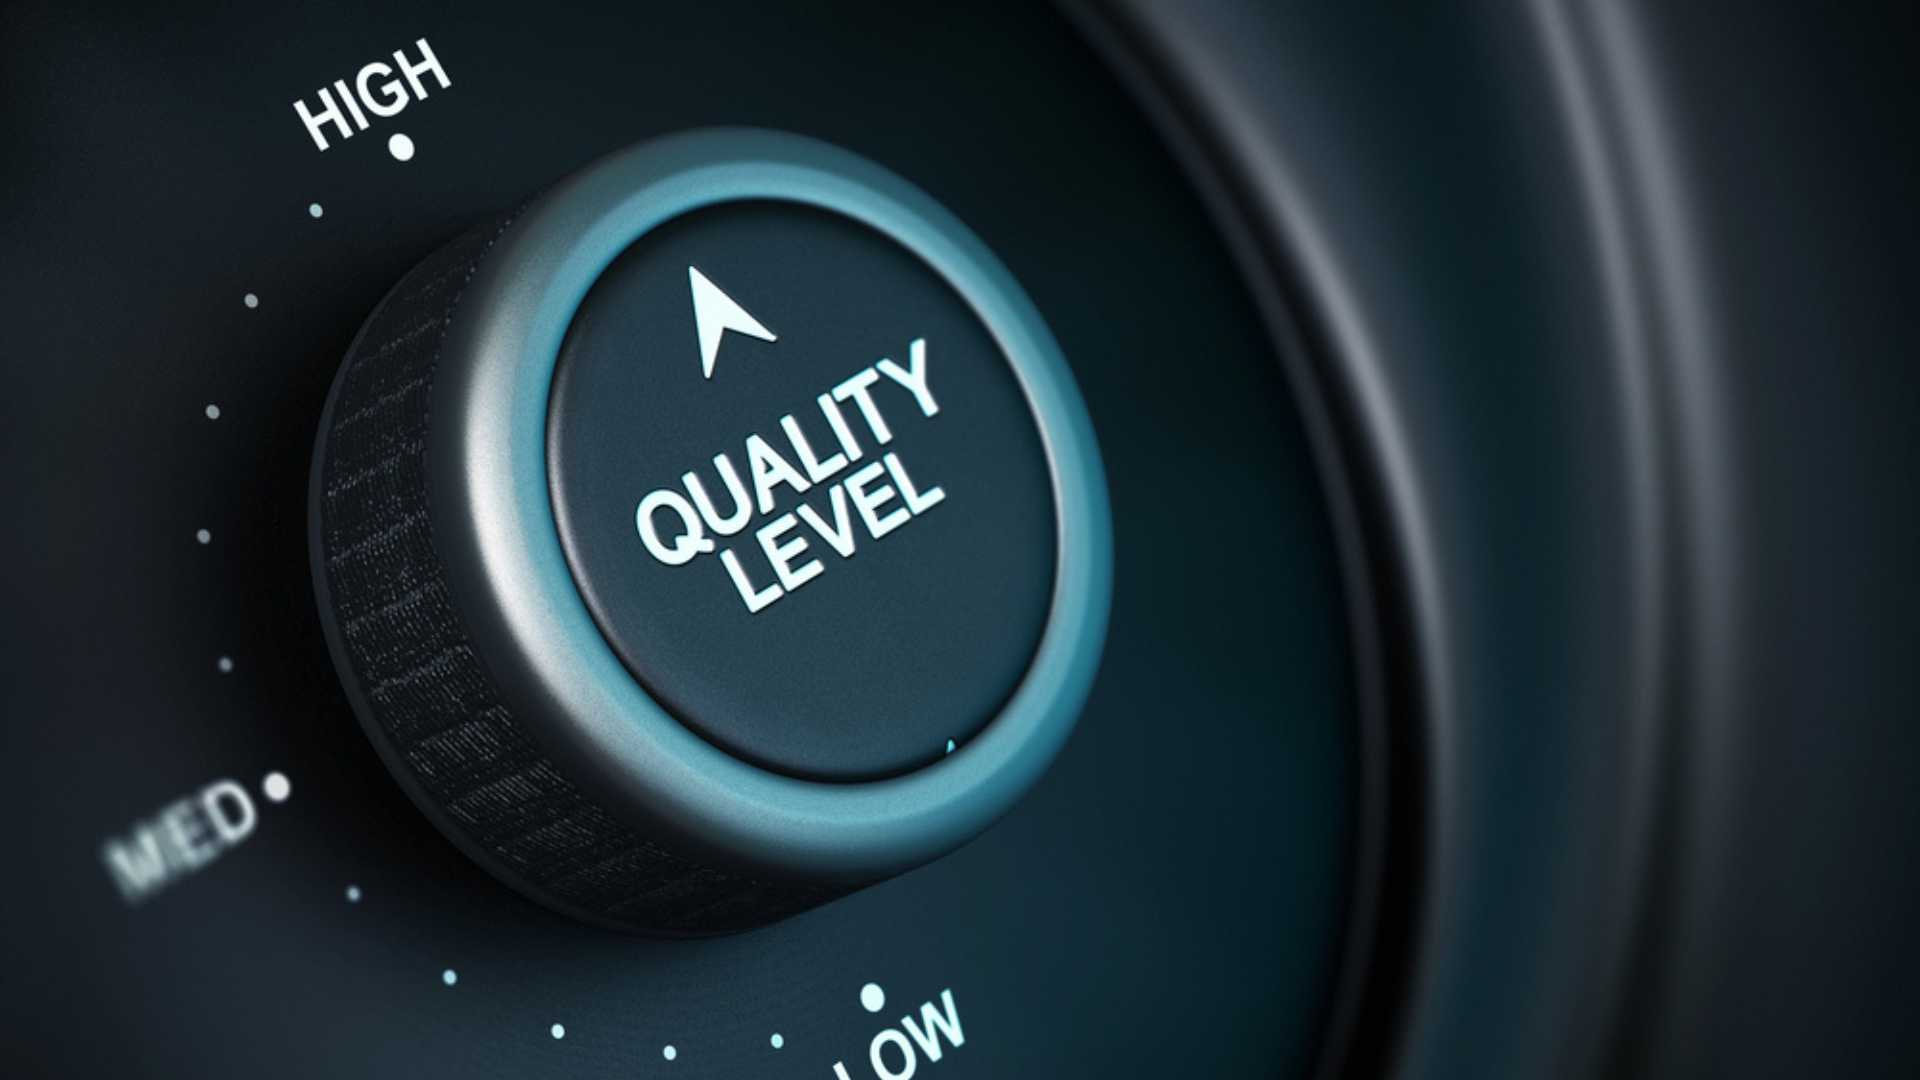 Many industries use QMS. Why does implementing quality systems seem harder to apply to medical device driven by regulations?